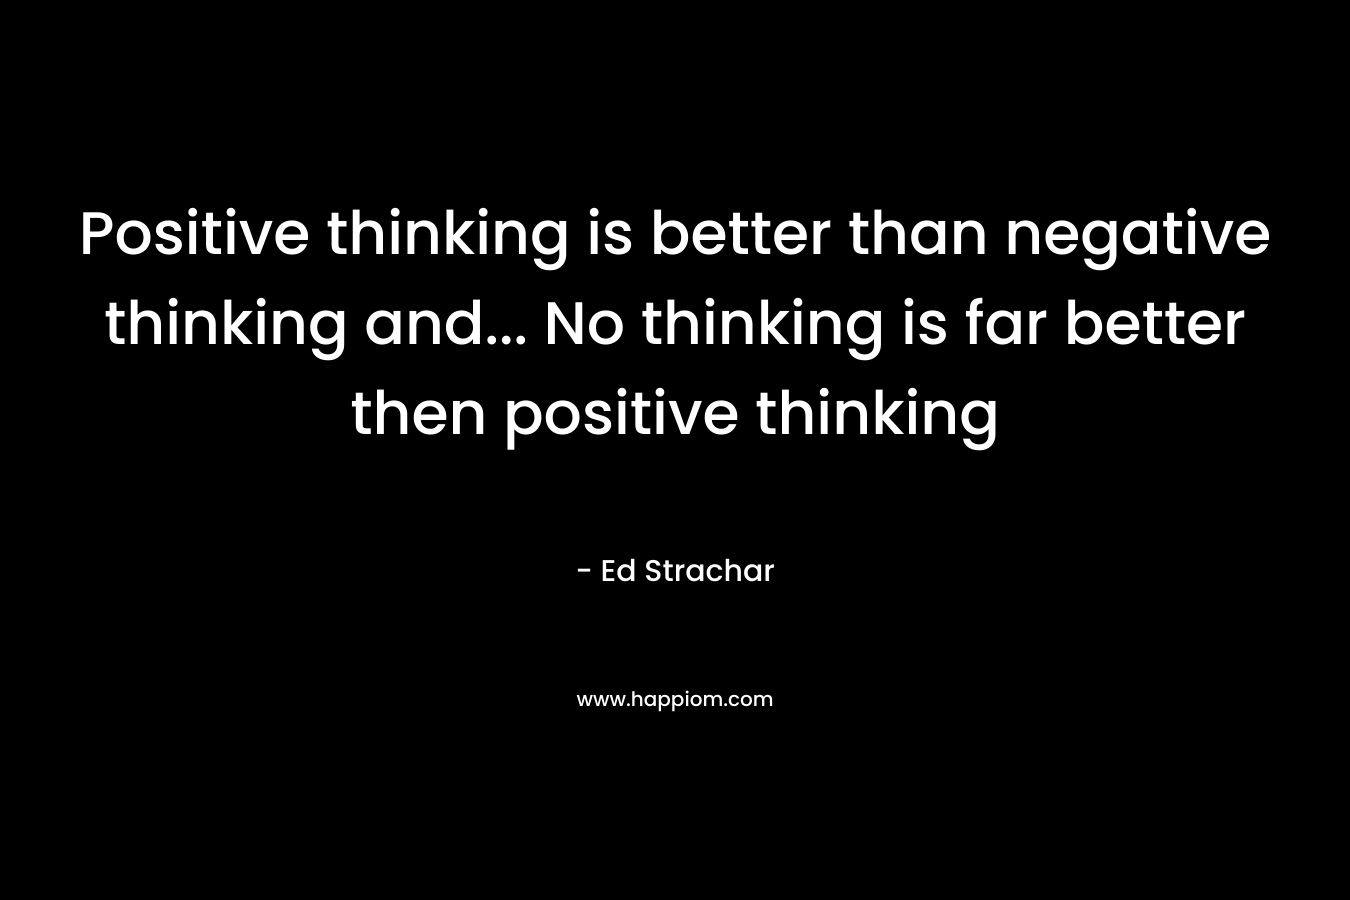 Positive thinking is better than negative thinking and... No thinking is far better then positive thinking